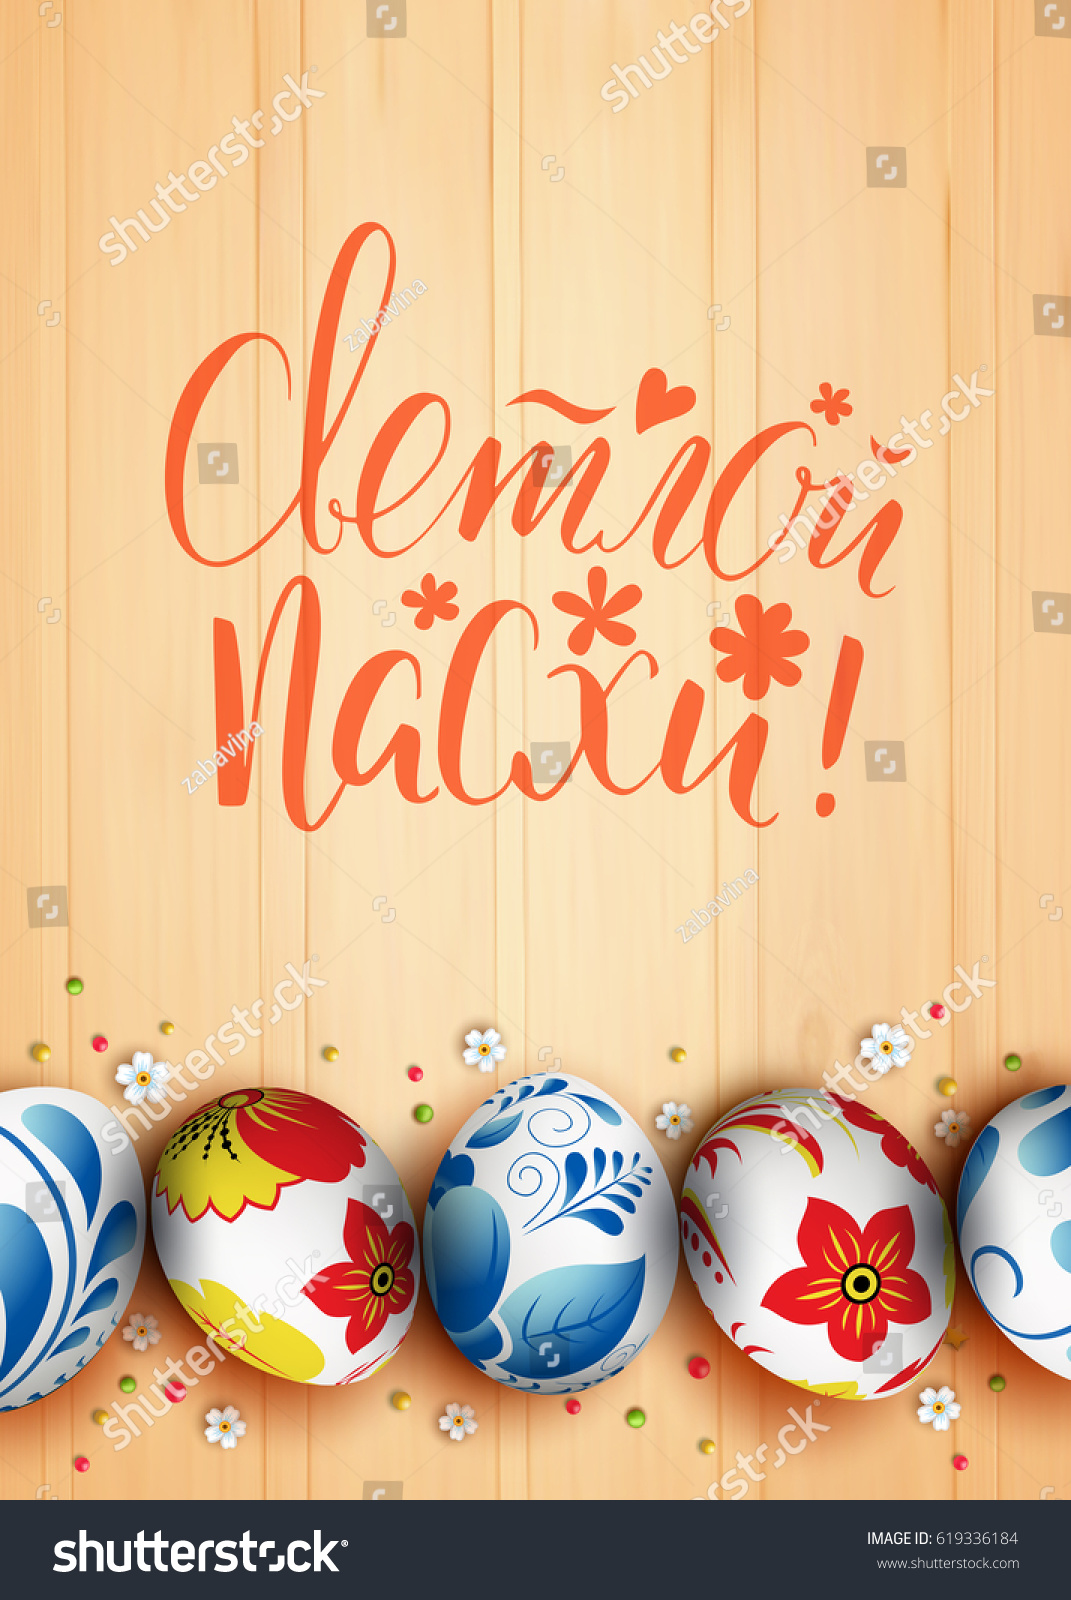 Template vector poster with realistic eggs decorated Russian folk painting. 3D. Hand draw inscription Happy Easter and bunny. Handwritten brush lettering with rough edges. Wood background. #619336184